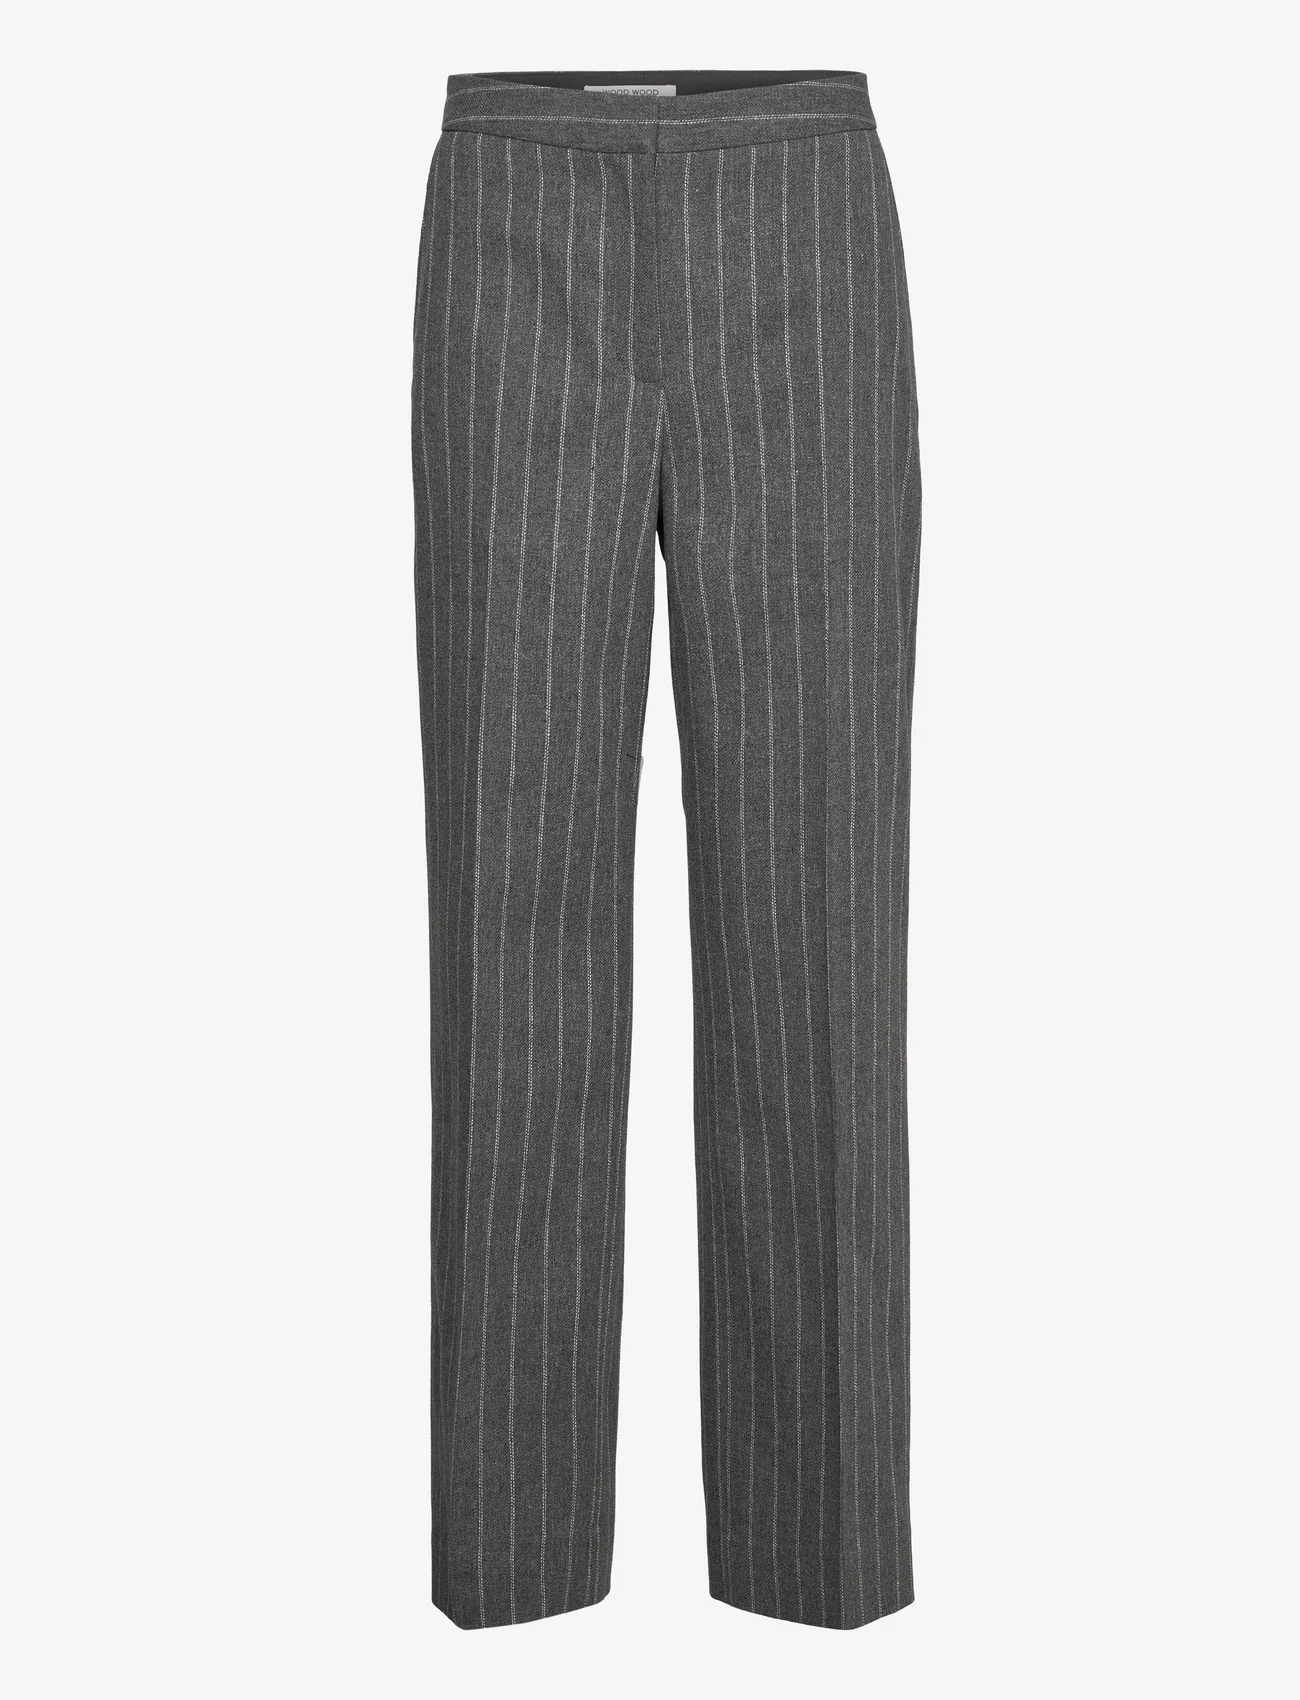 Wood Wood - Willow wool trousers - straight leg trousers - charcoal - 0